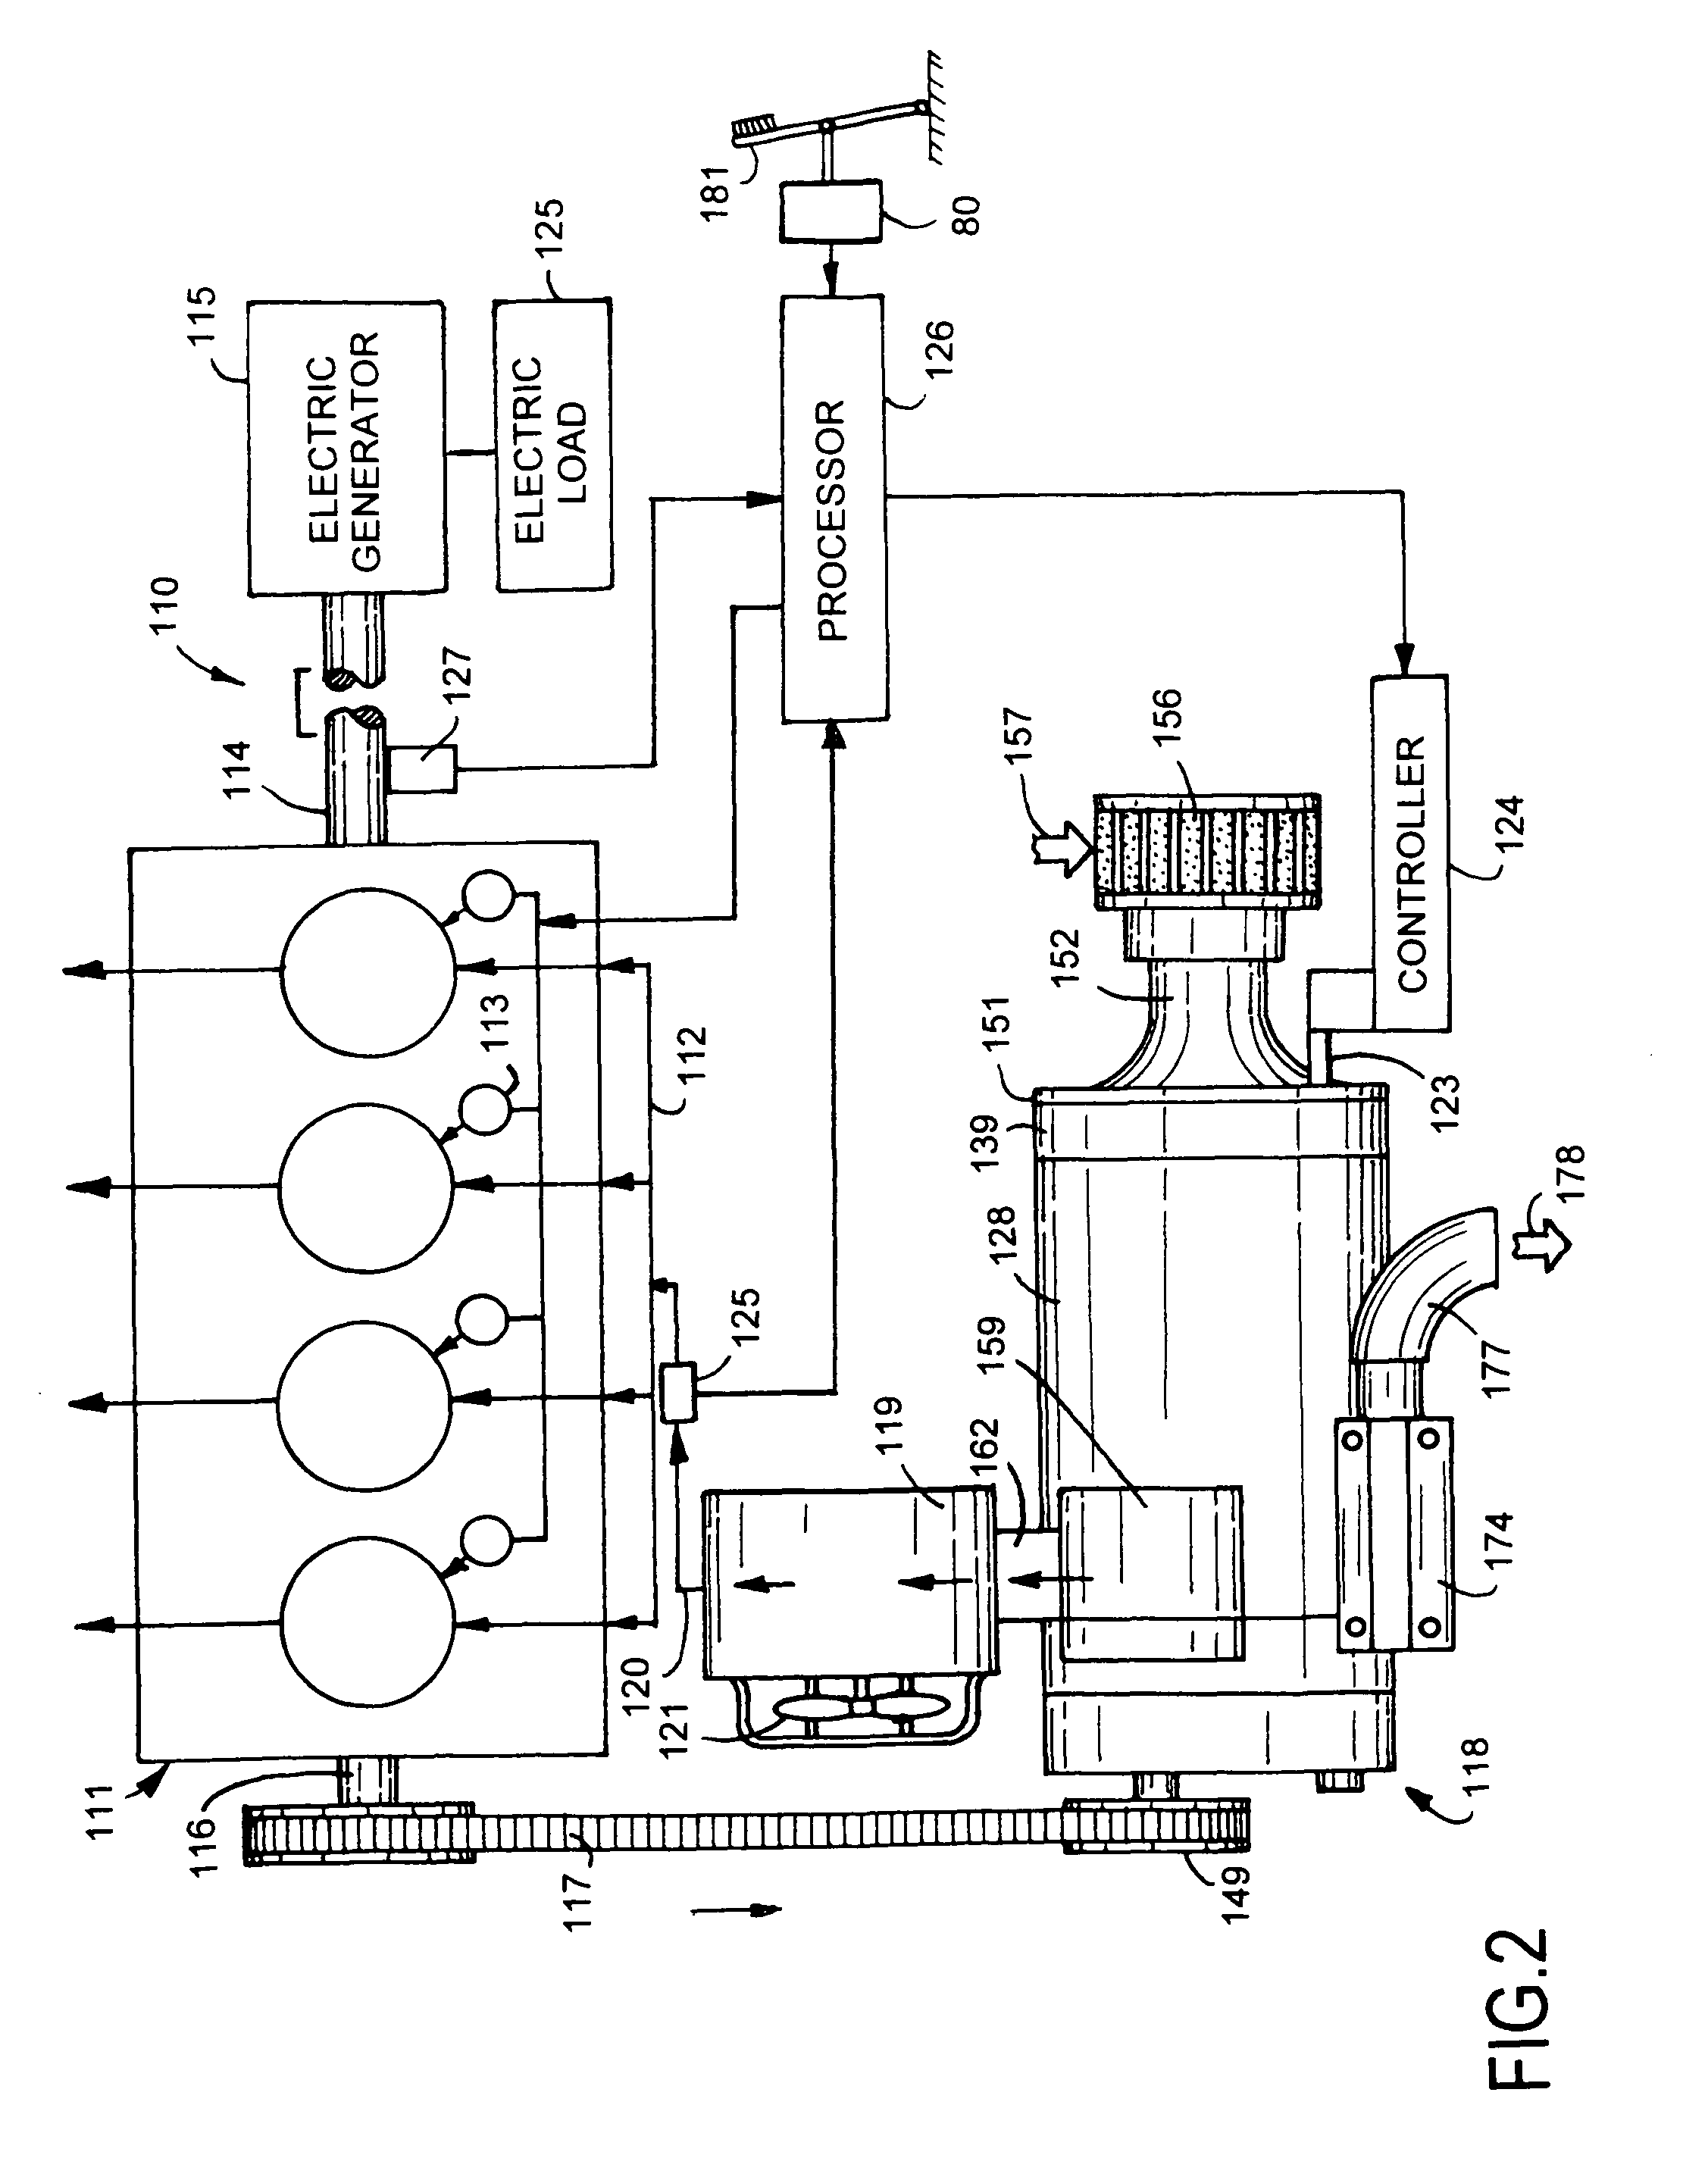 Internal combustion engine and supercharger